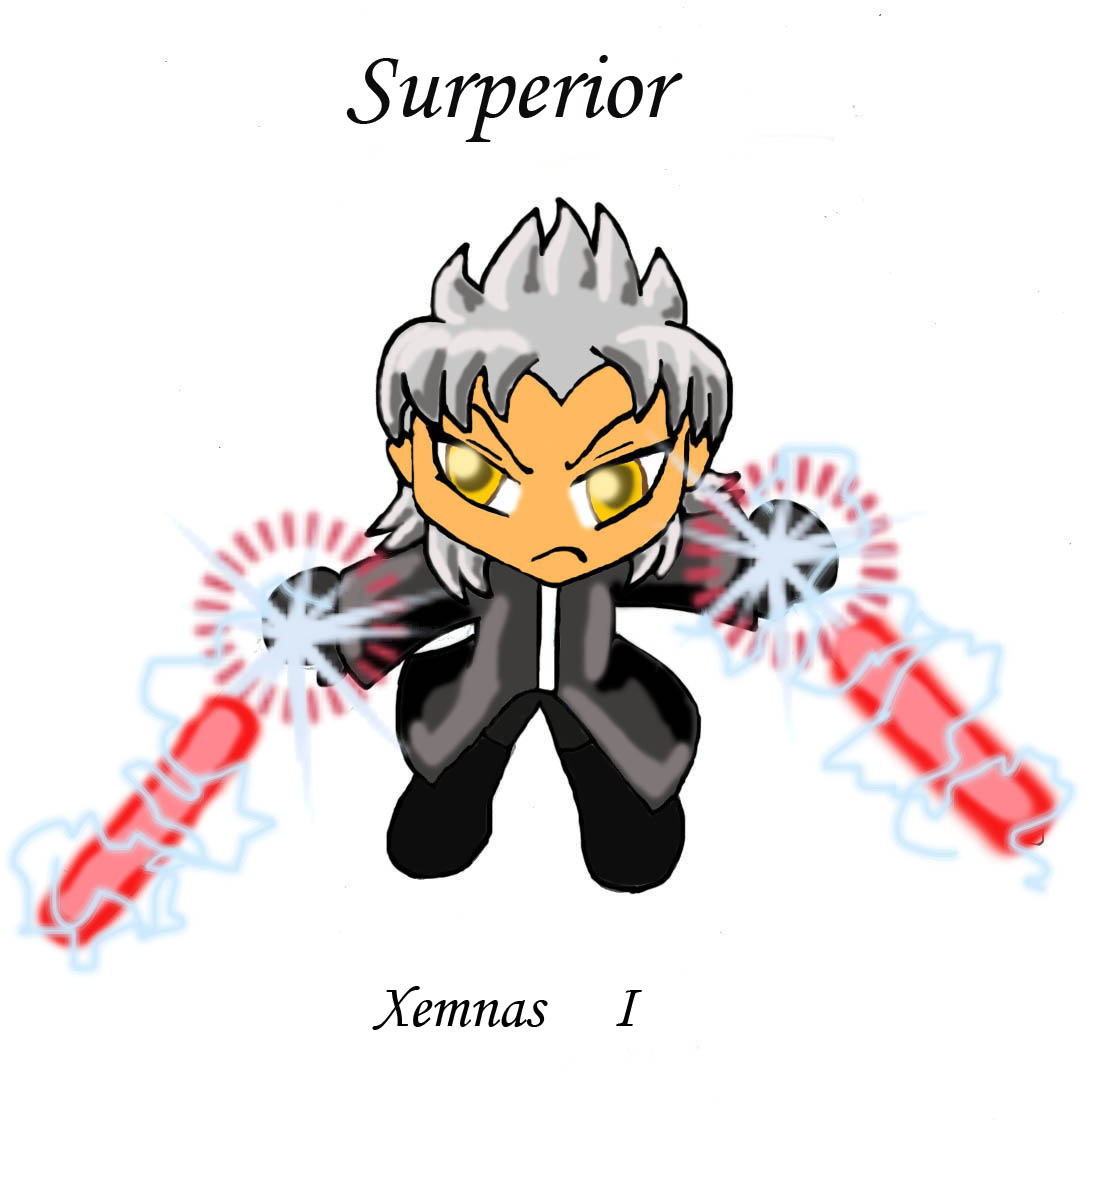 wittle Xemnas by crazykid15